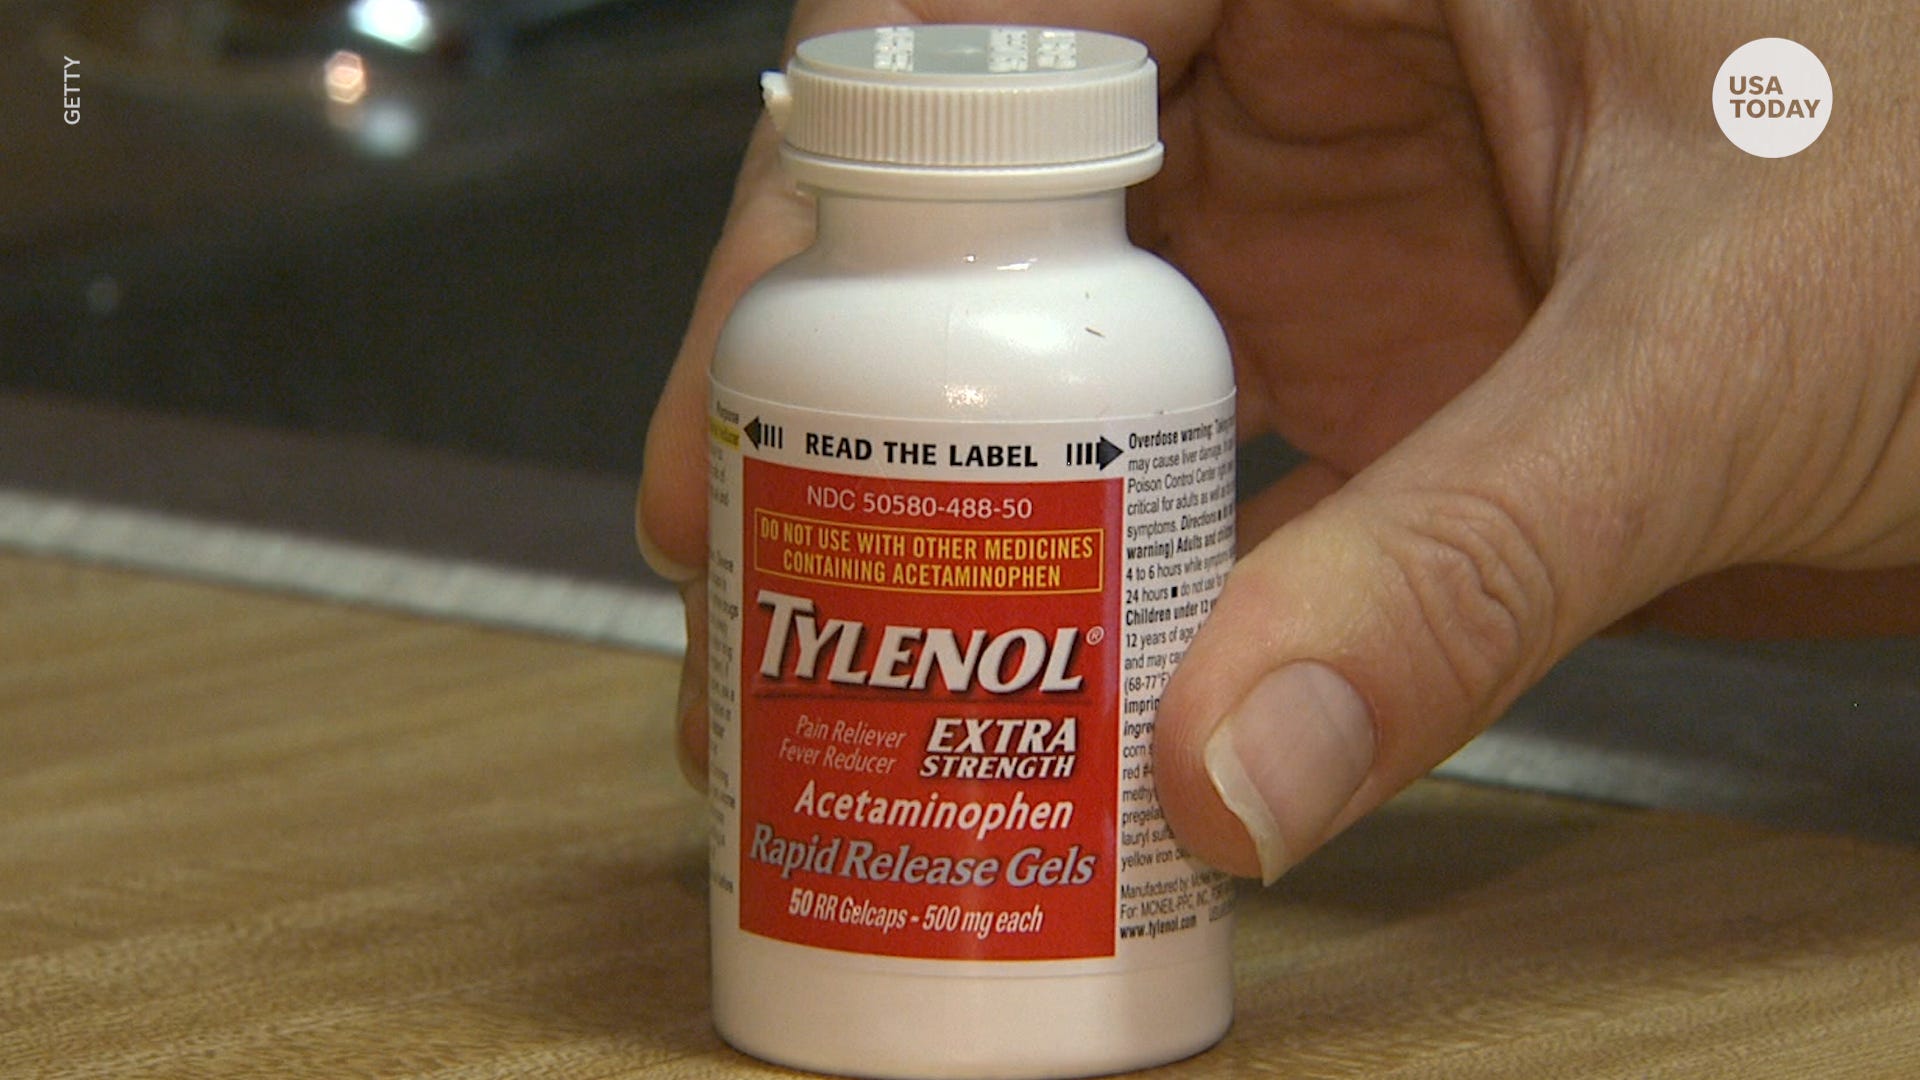 How often you can take Tylenol? Explaining the safe use of acetaminophen for pain relief